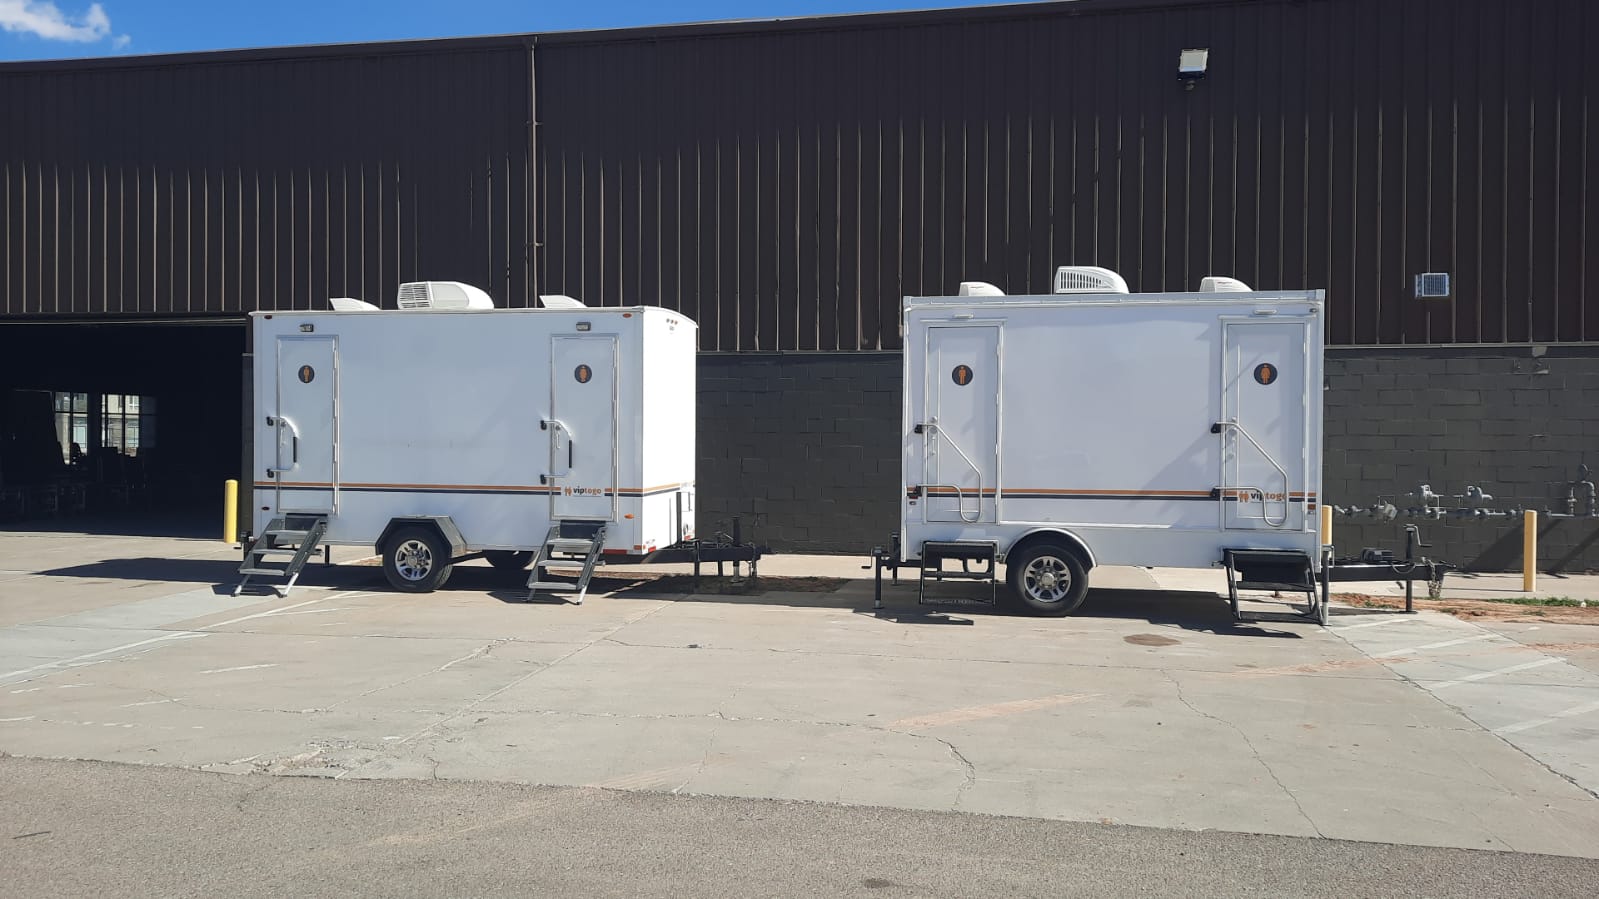 portable toilet trailers parked at a facility